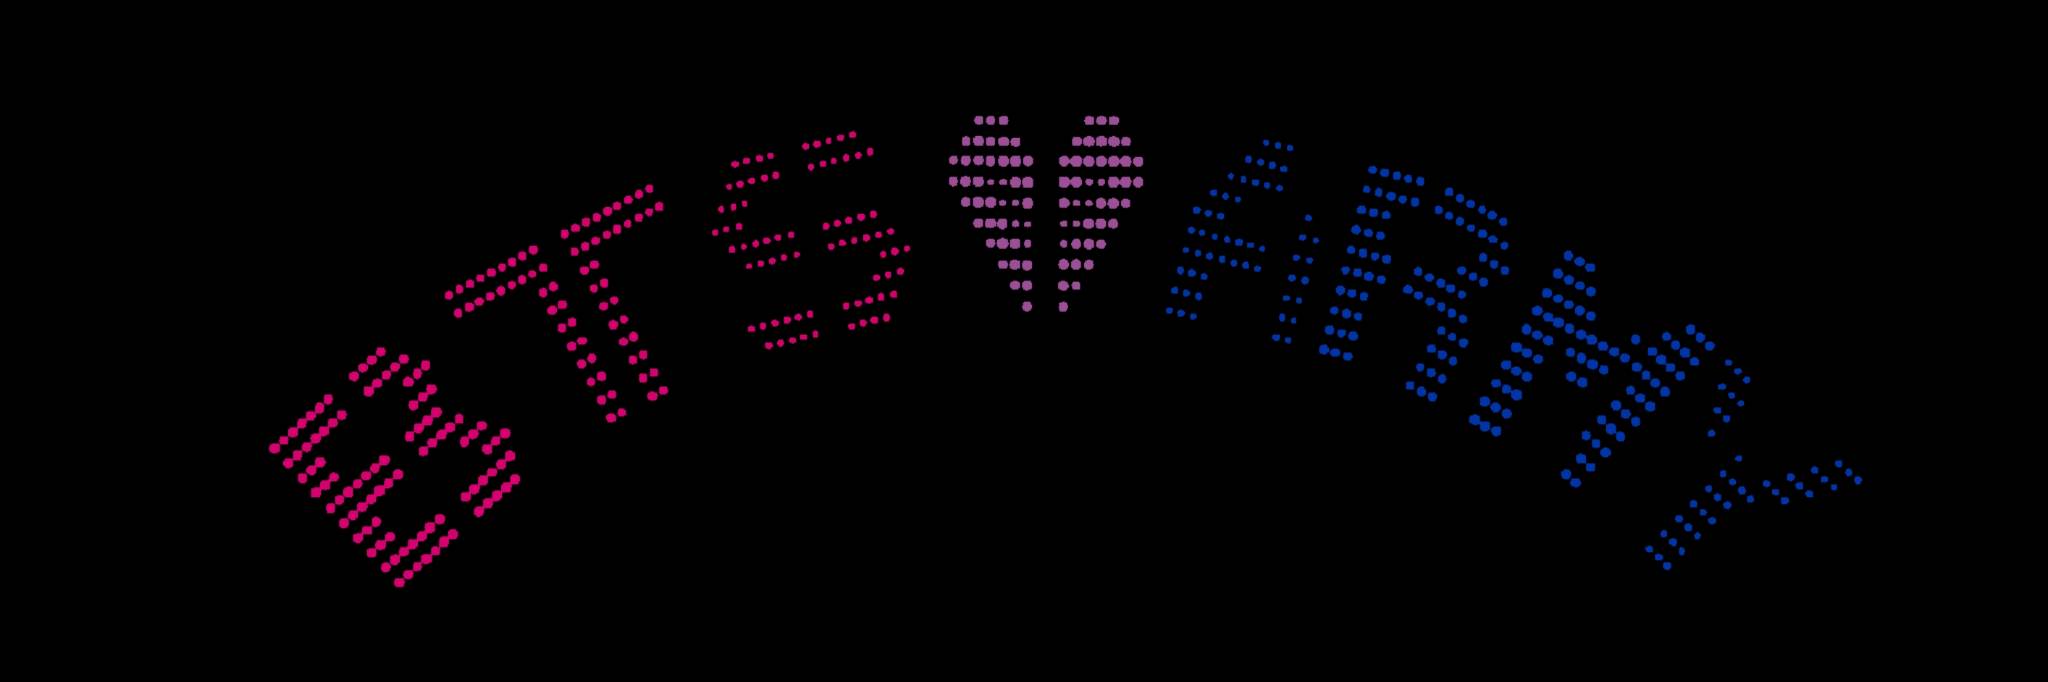 black twitter header with text bts ♡ army in bi flag lights